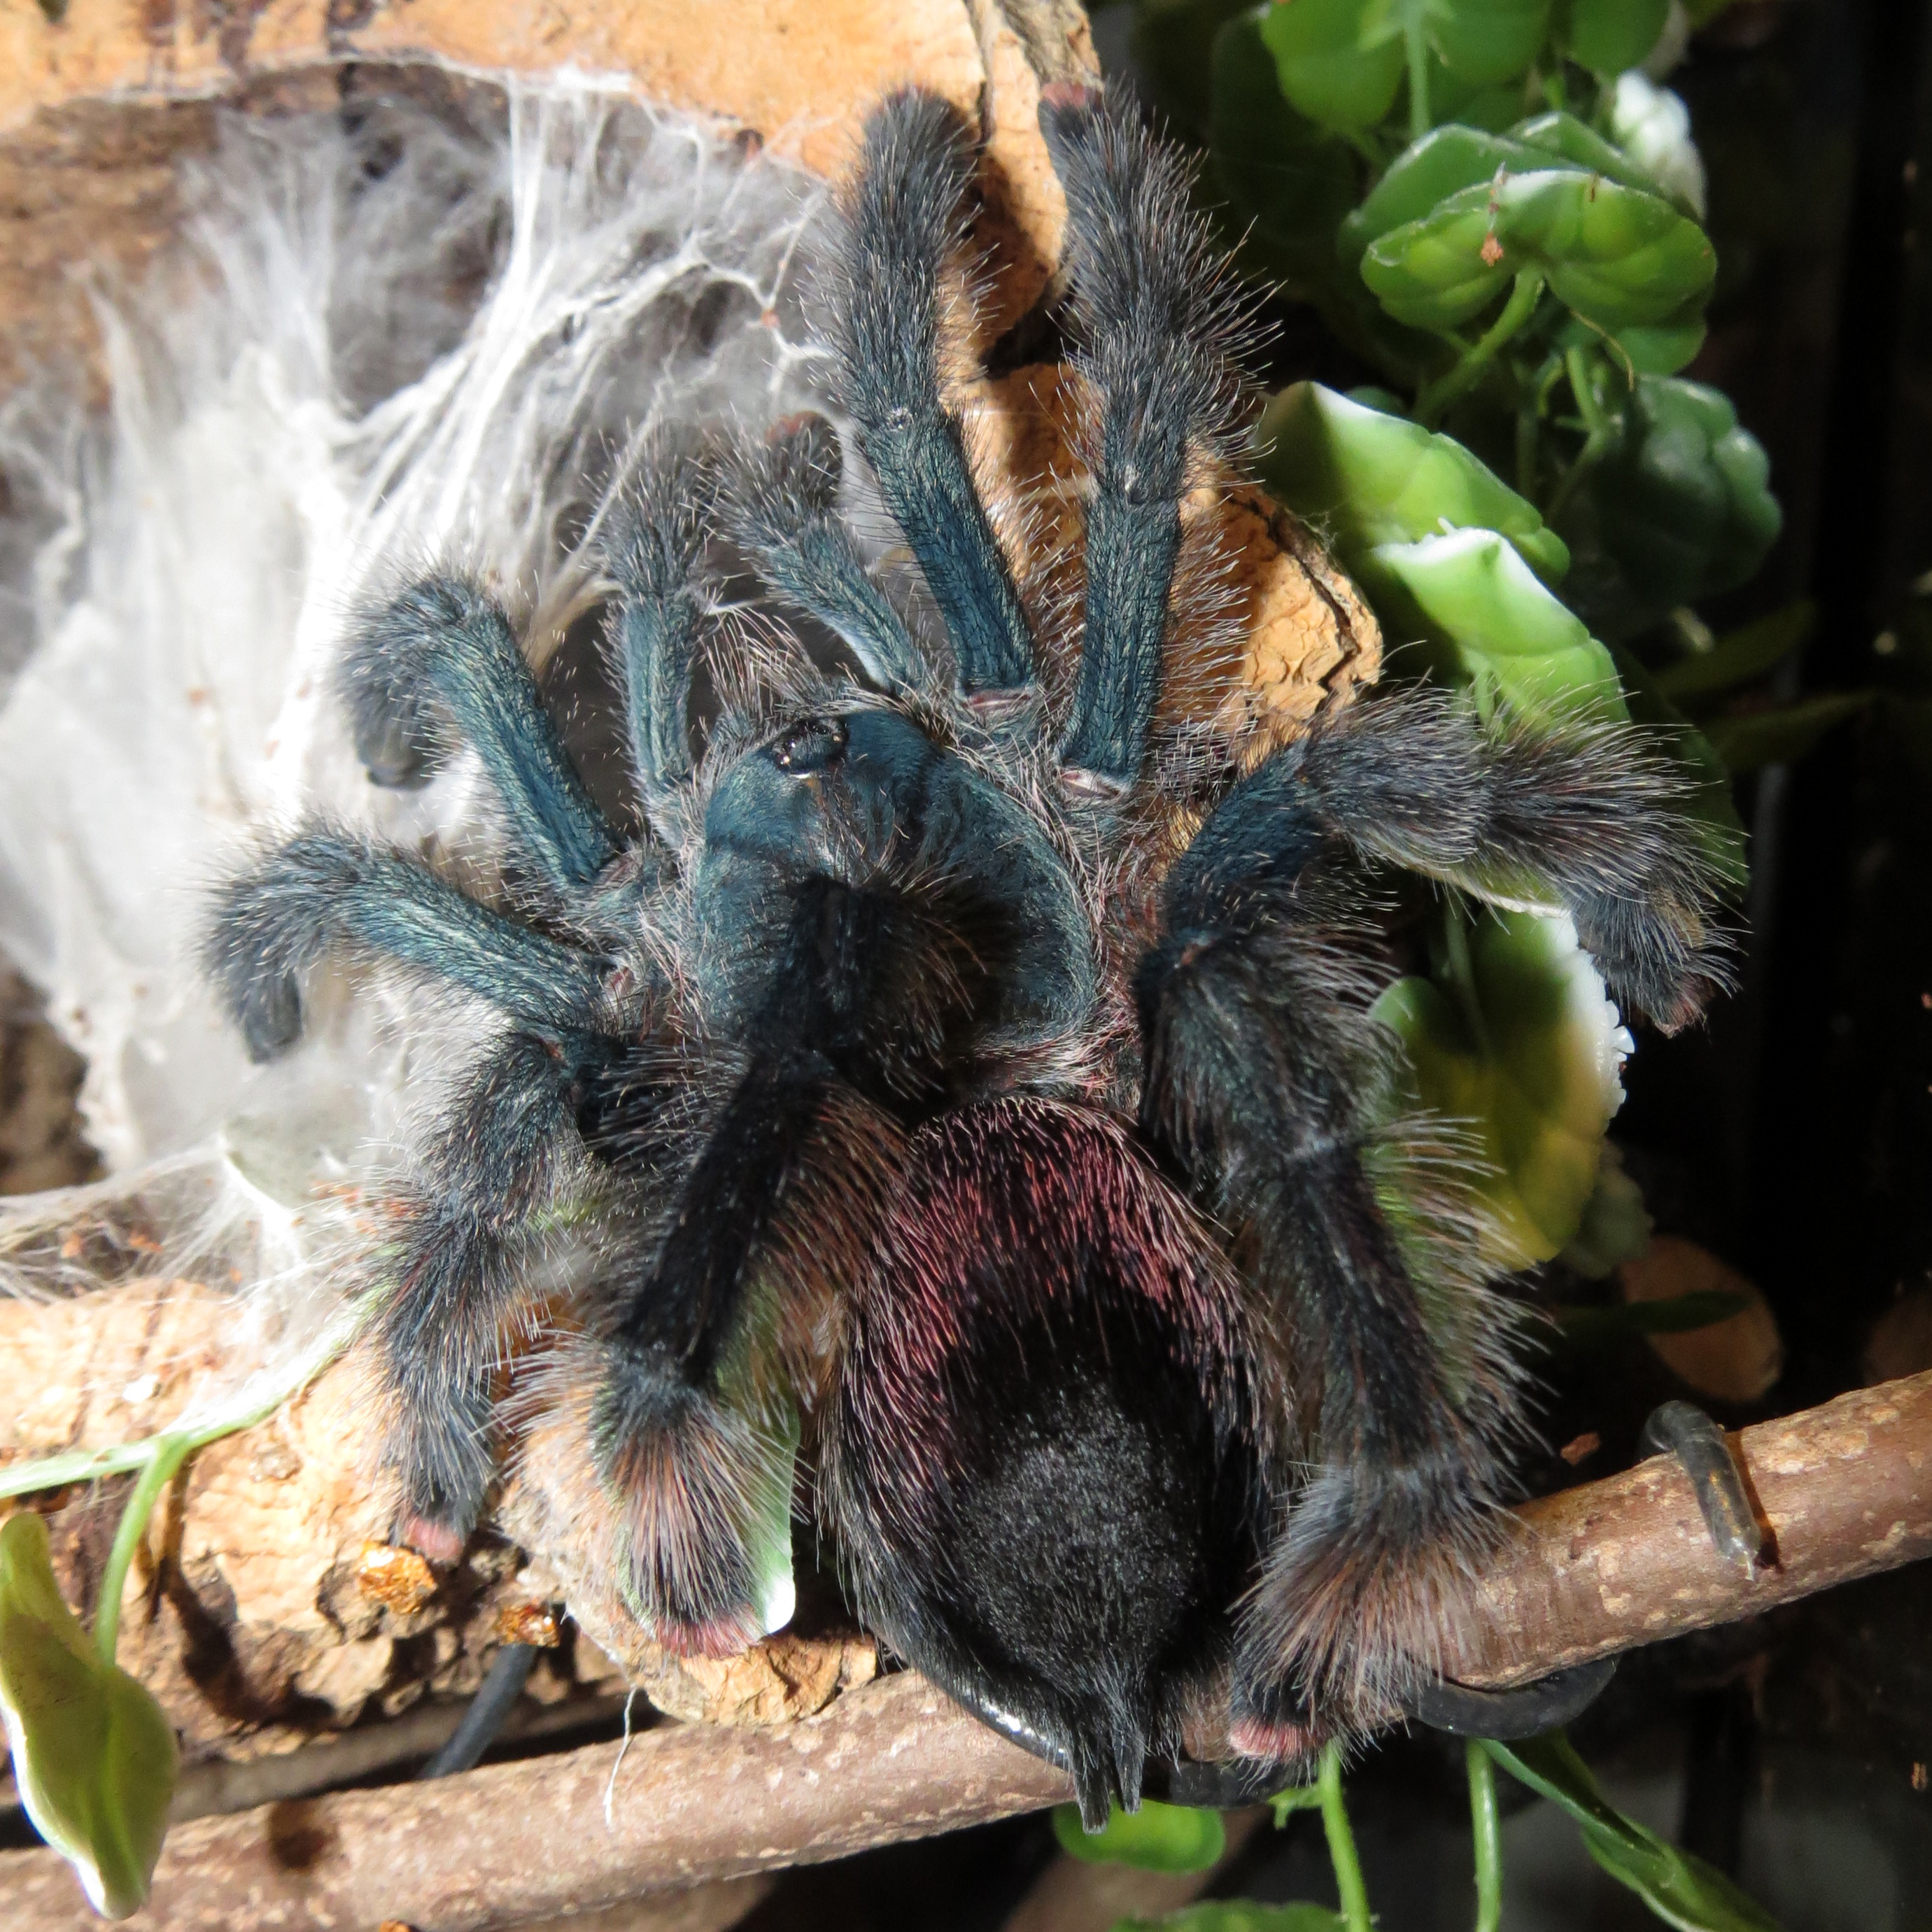 Freshly Molted Poop Cannon (♀ Avicularia avicularia 5")